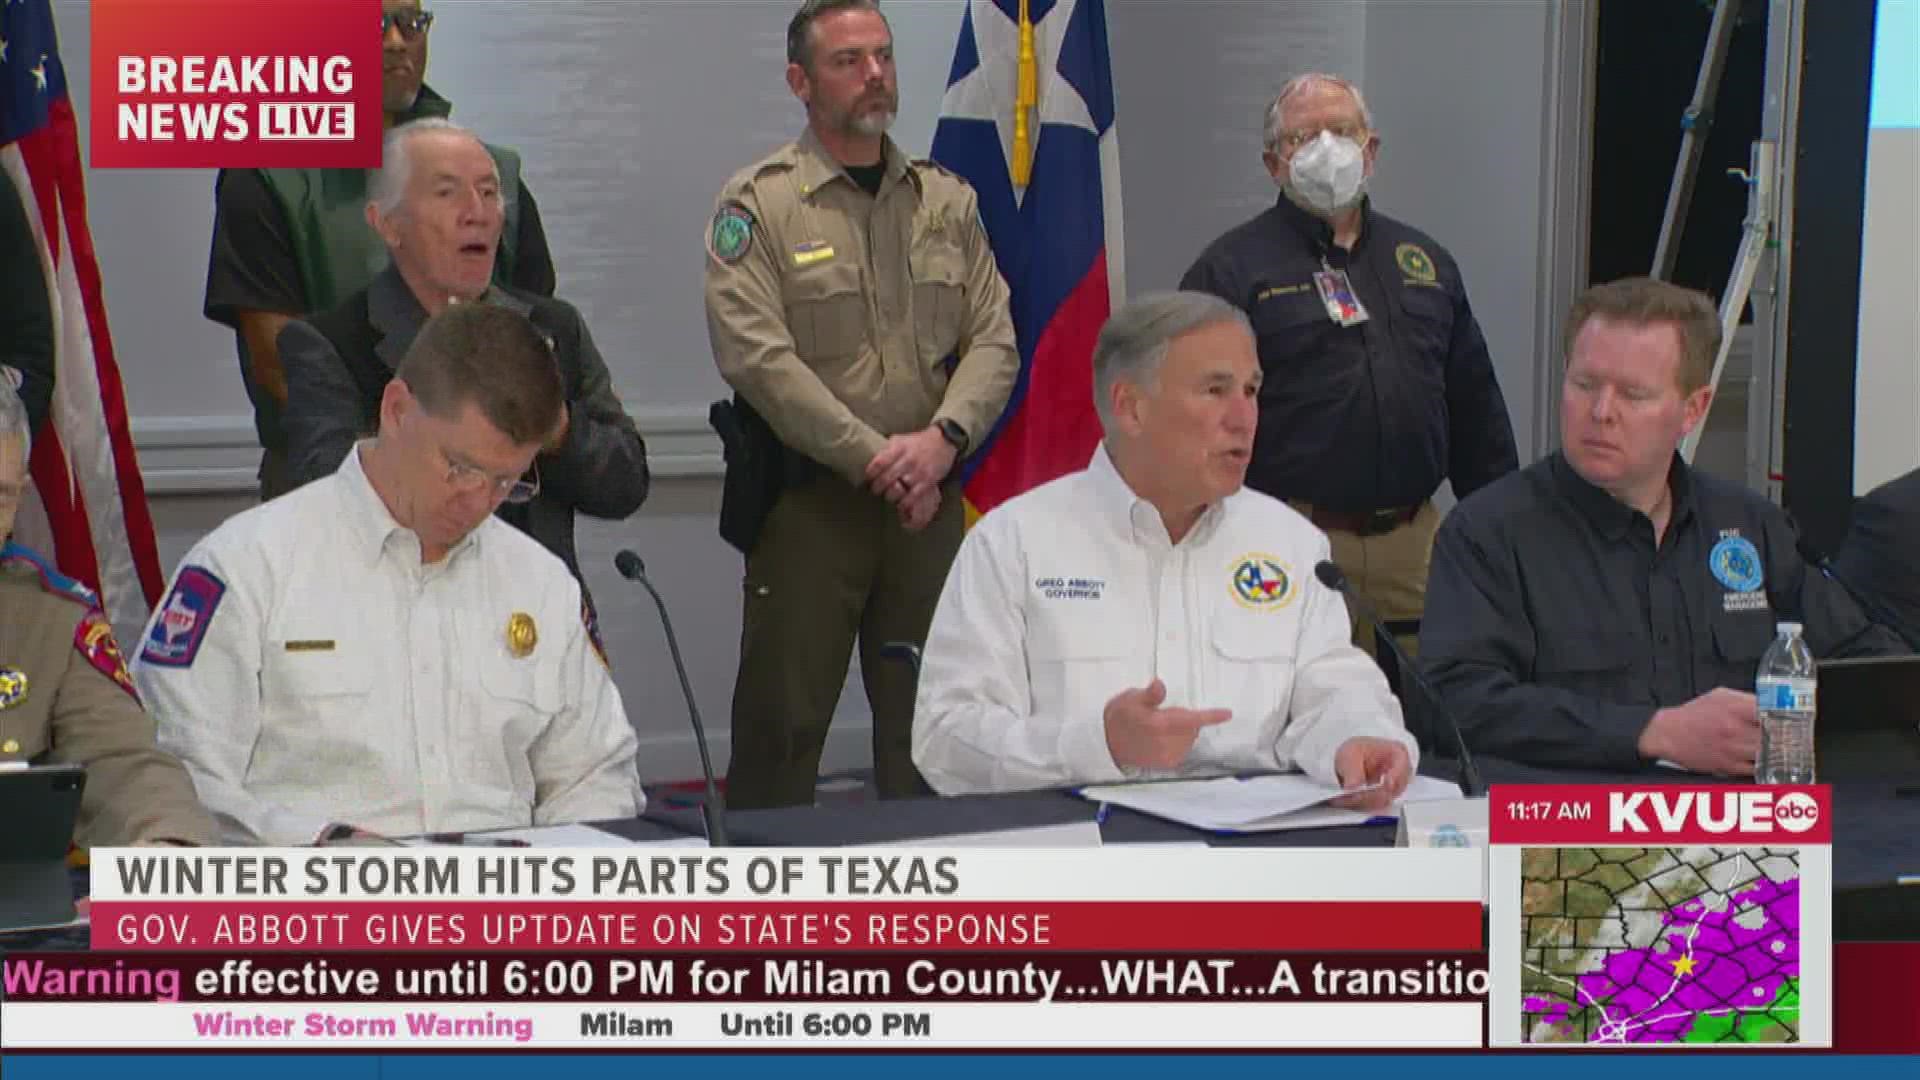 Texas Gov. Greg Abbott gives live updates on the State's winter storm response.